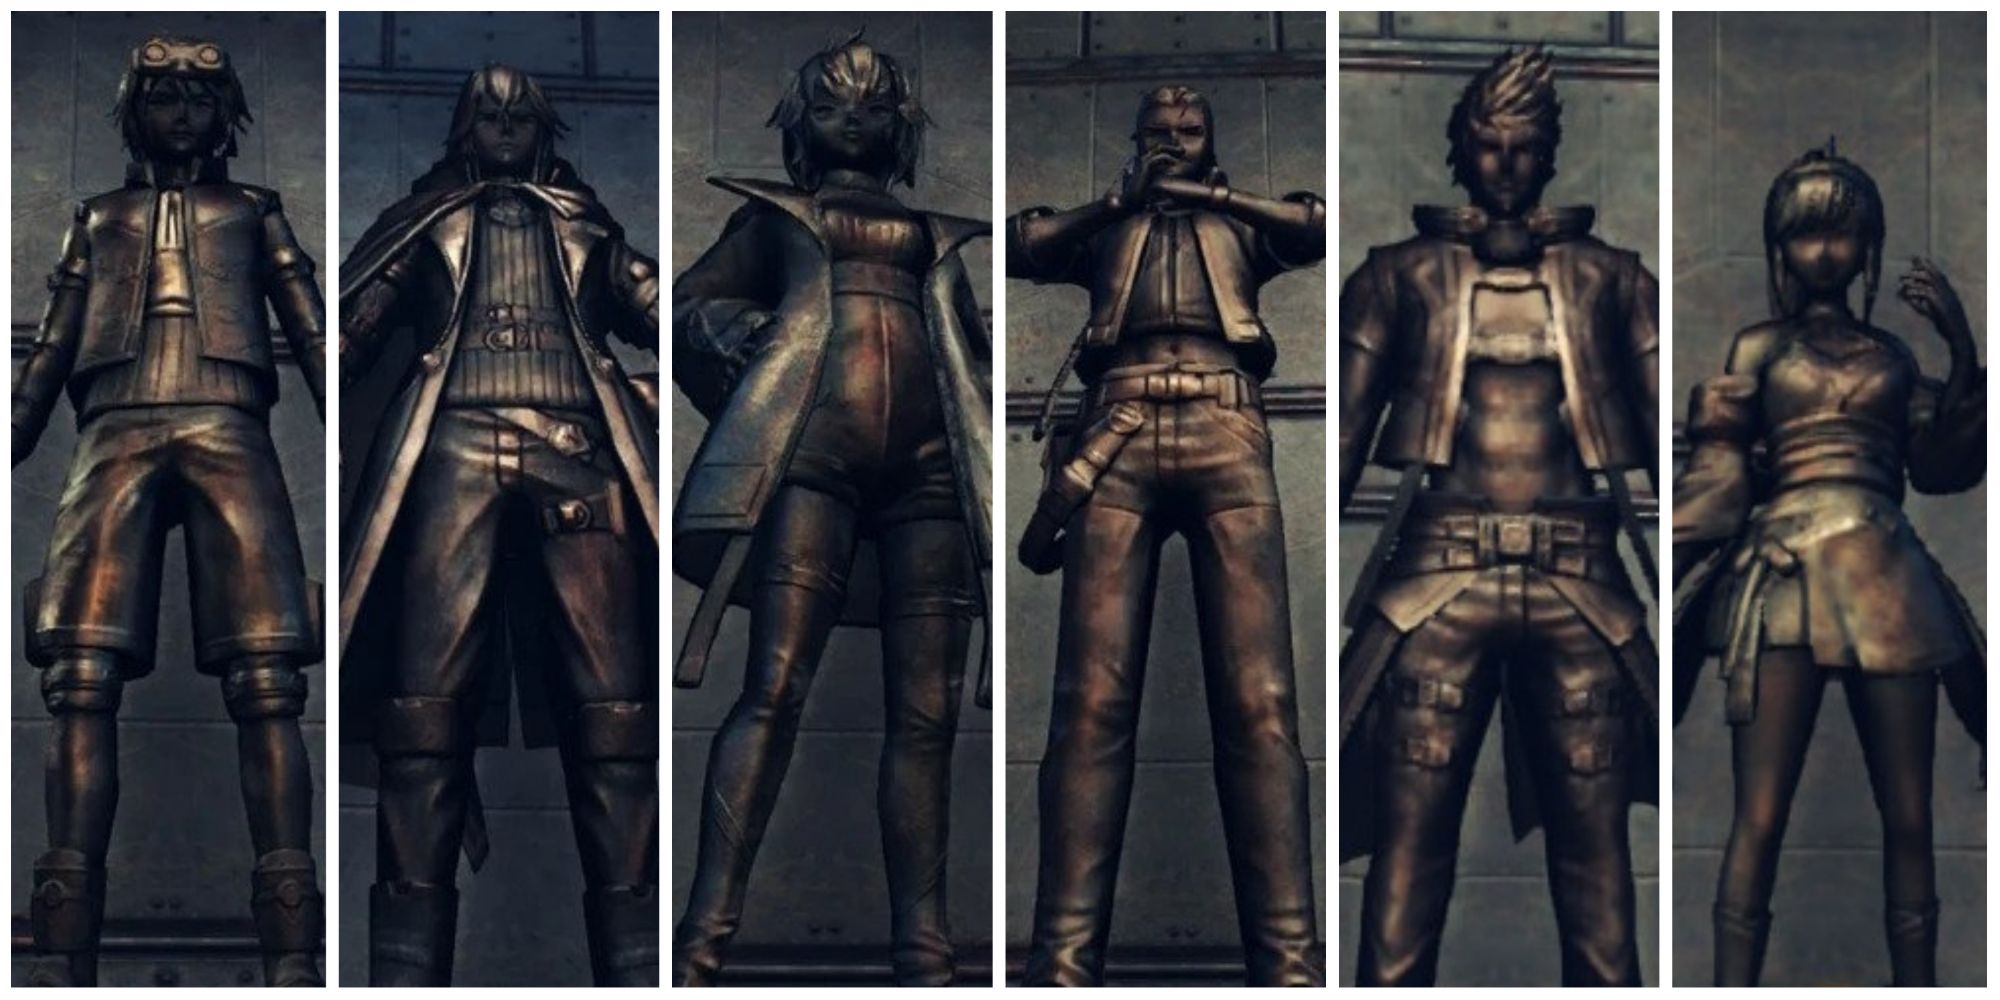 Split image screenshots of the six Founder statues in Xenoblade Chronicles 3.